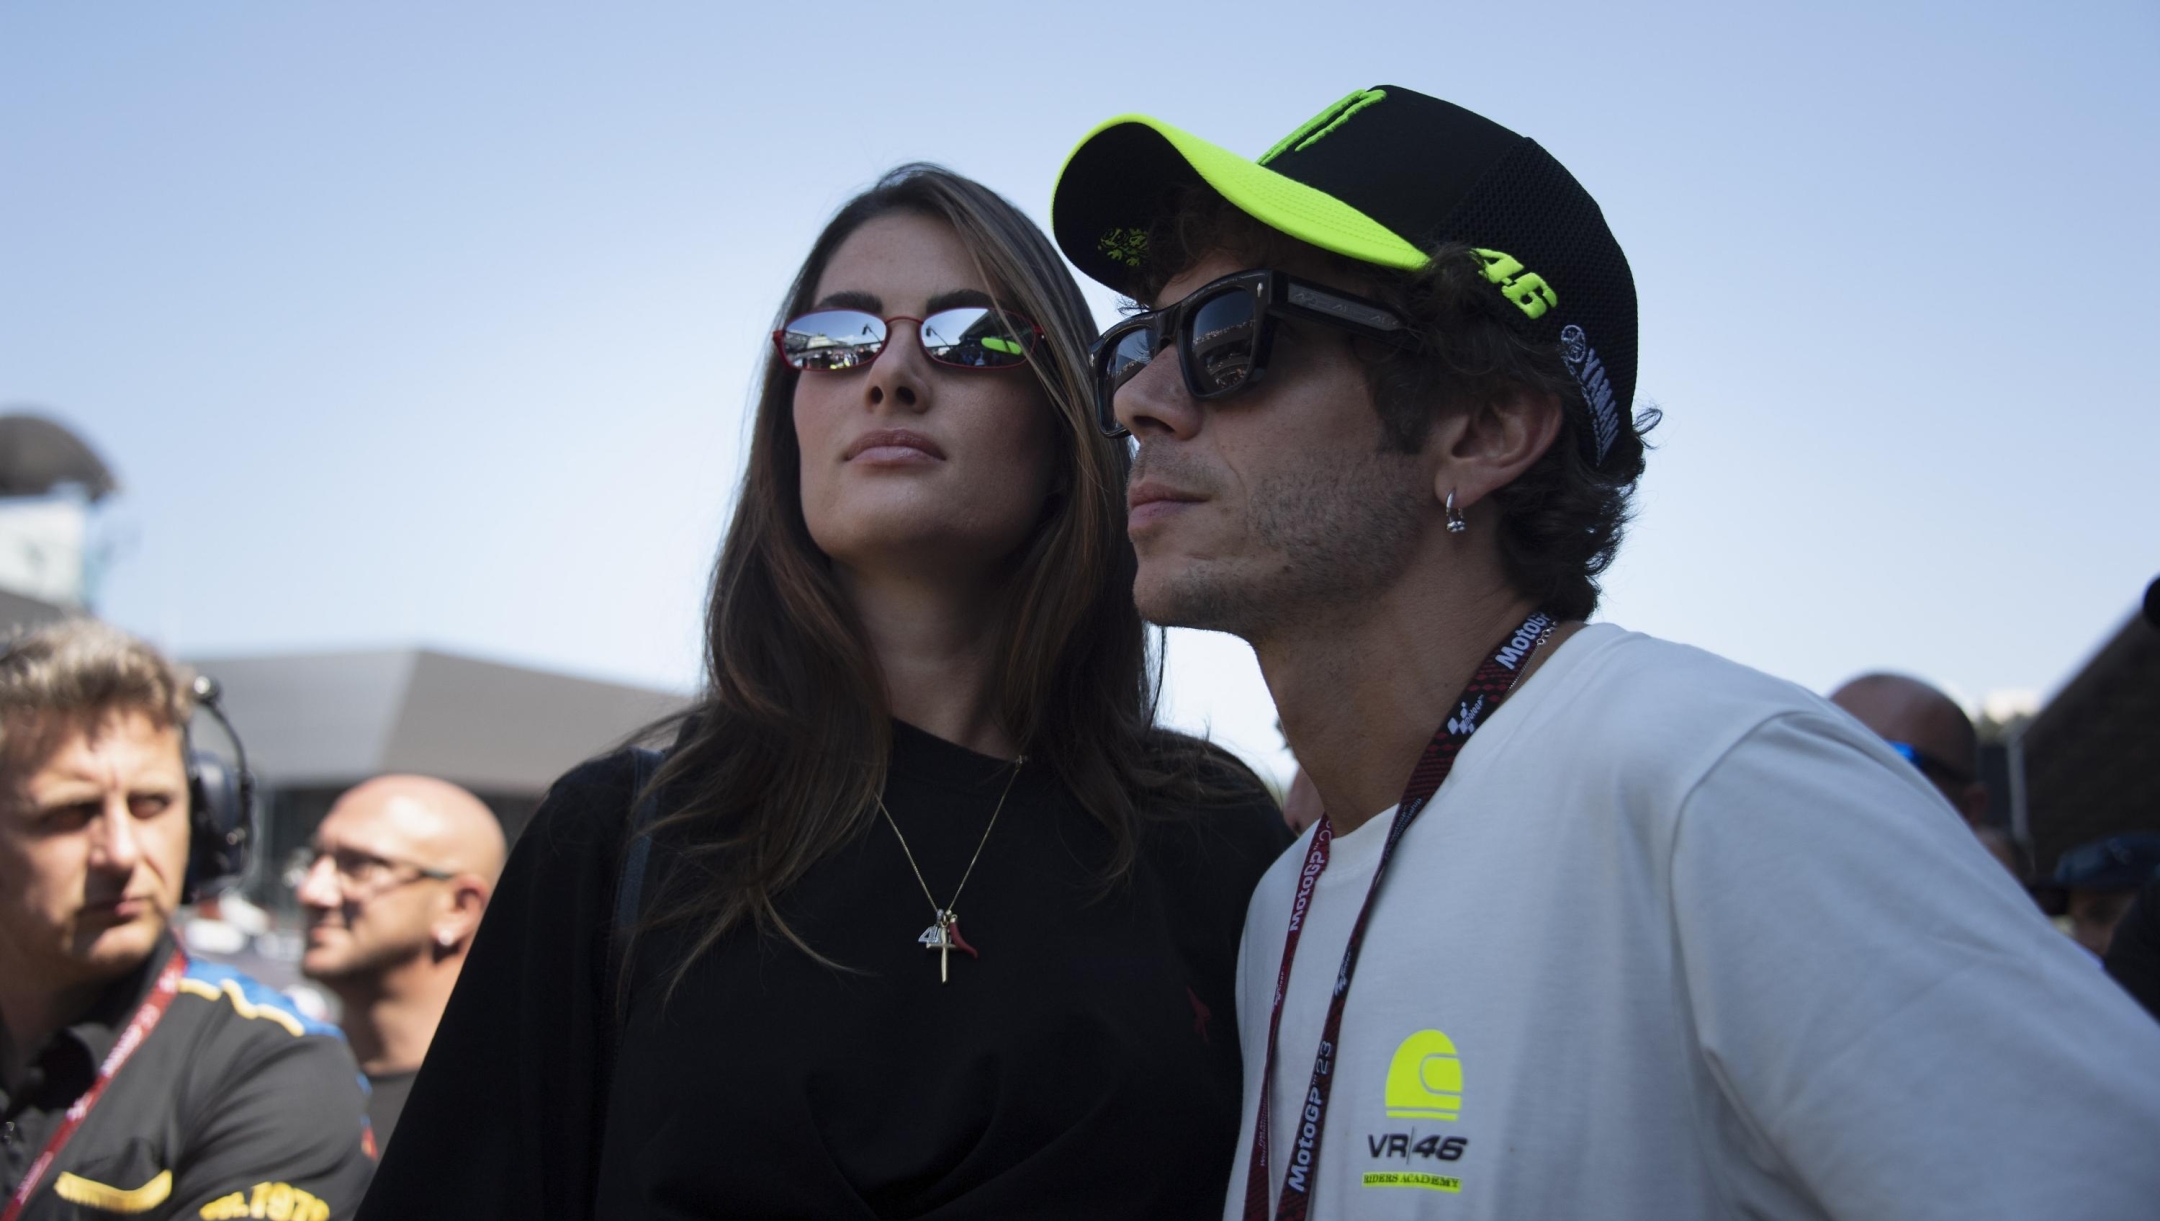 SPIELBERG, AUSTRIA - AUGUST 20: Valentino Rossi of Italy and Francesca Sofia Novello of Italy (girlfriend of Valentino Rossi of ITALY ) look on from the grid during the MotoGP race during the MotoGP of Austria - Race at Red Bull Ring on August 20, 2023 in Spielberg, Austria. (Photo by Mirco Lazzari gp/Getty Images)